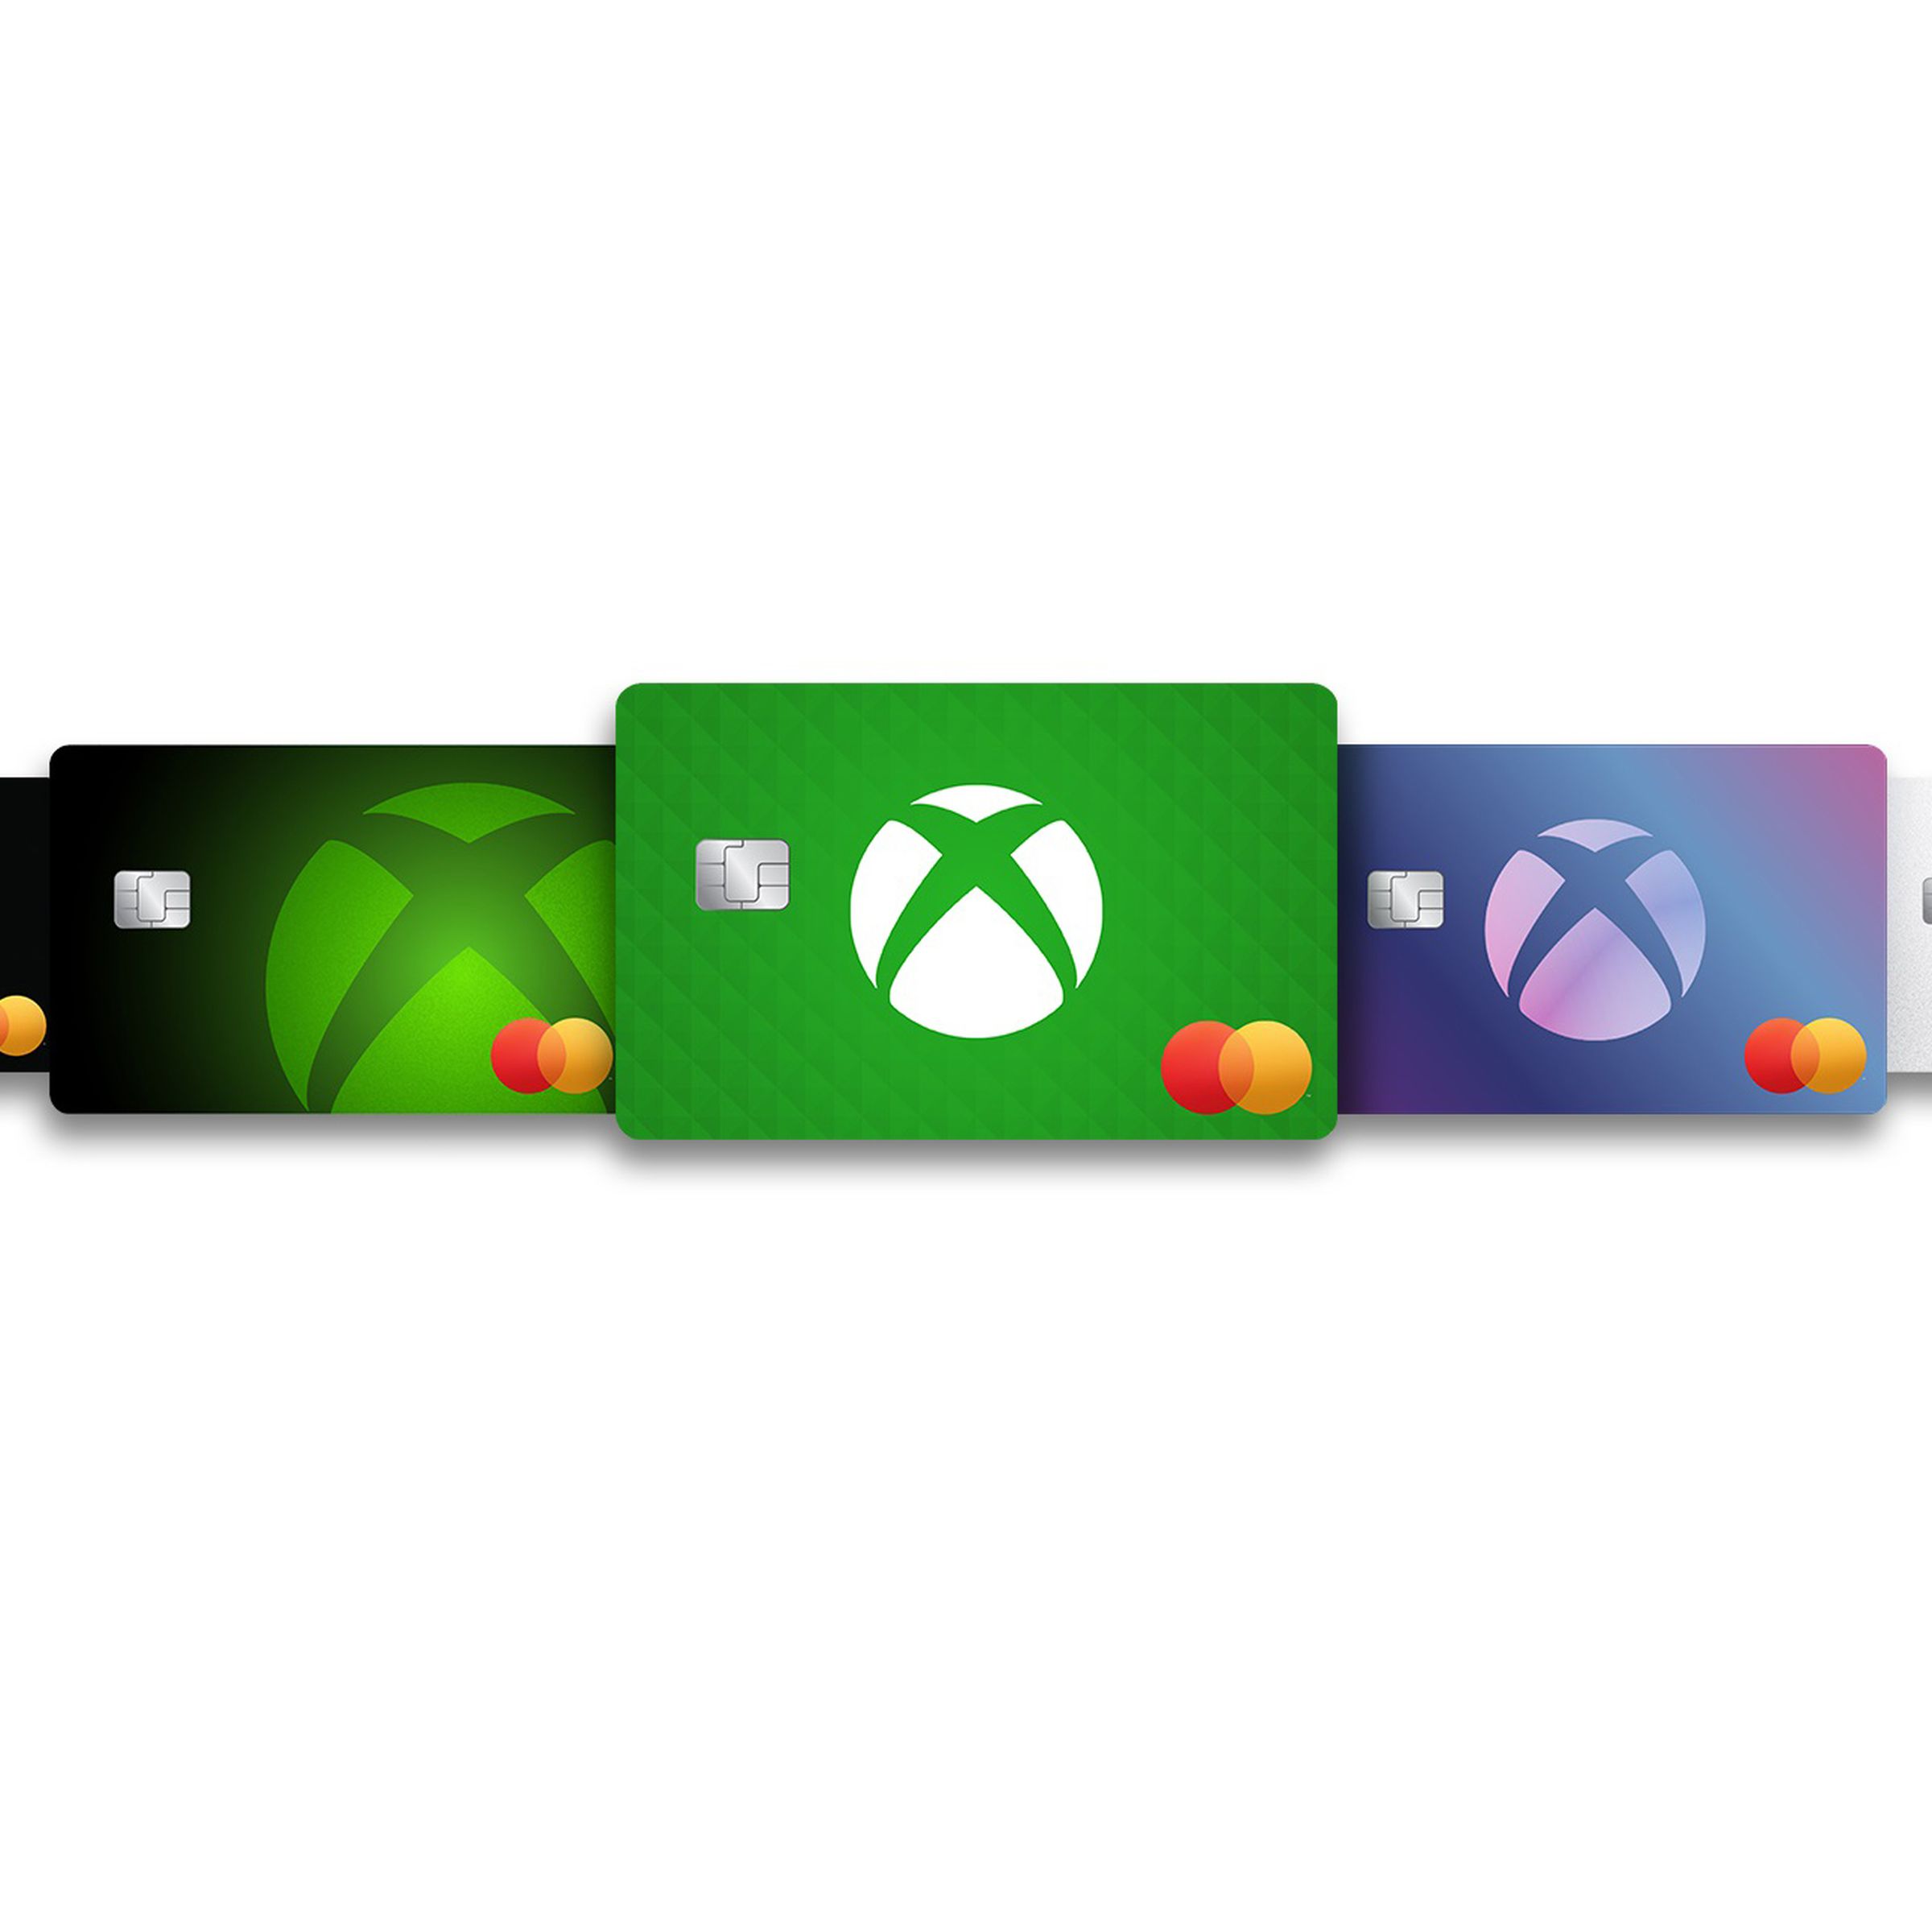 A selection of Xbox Mastercard options